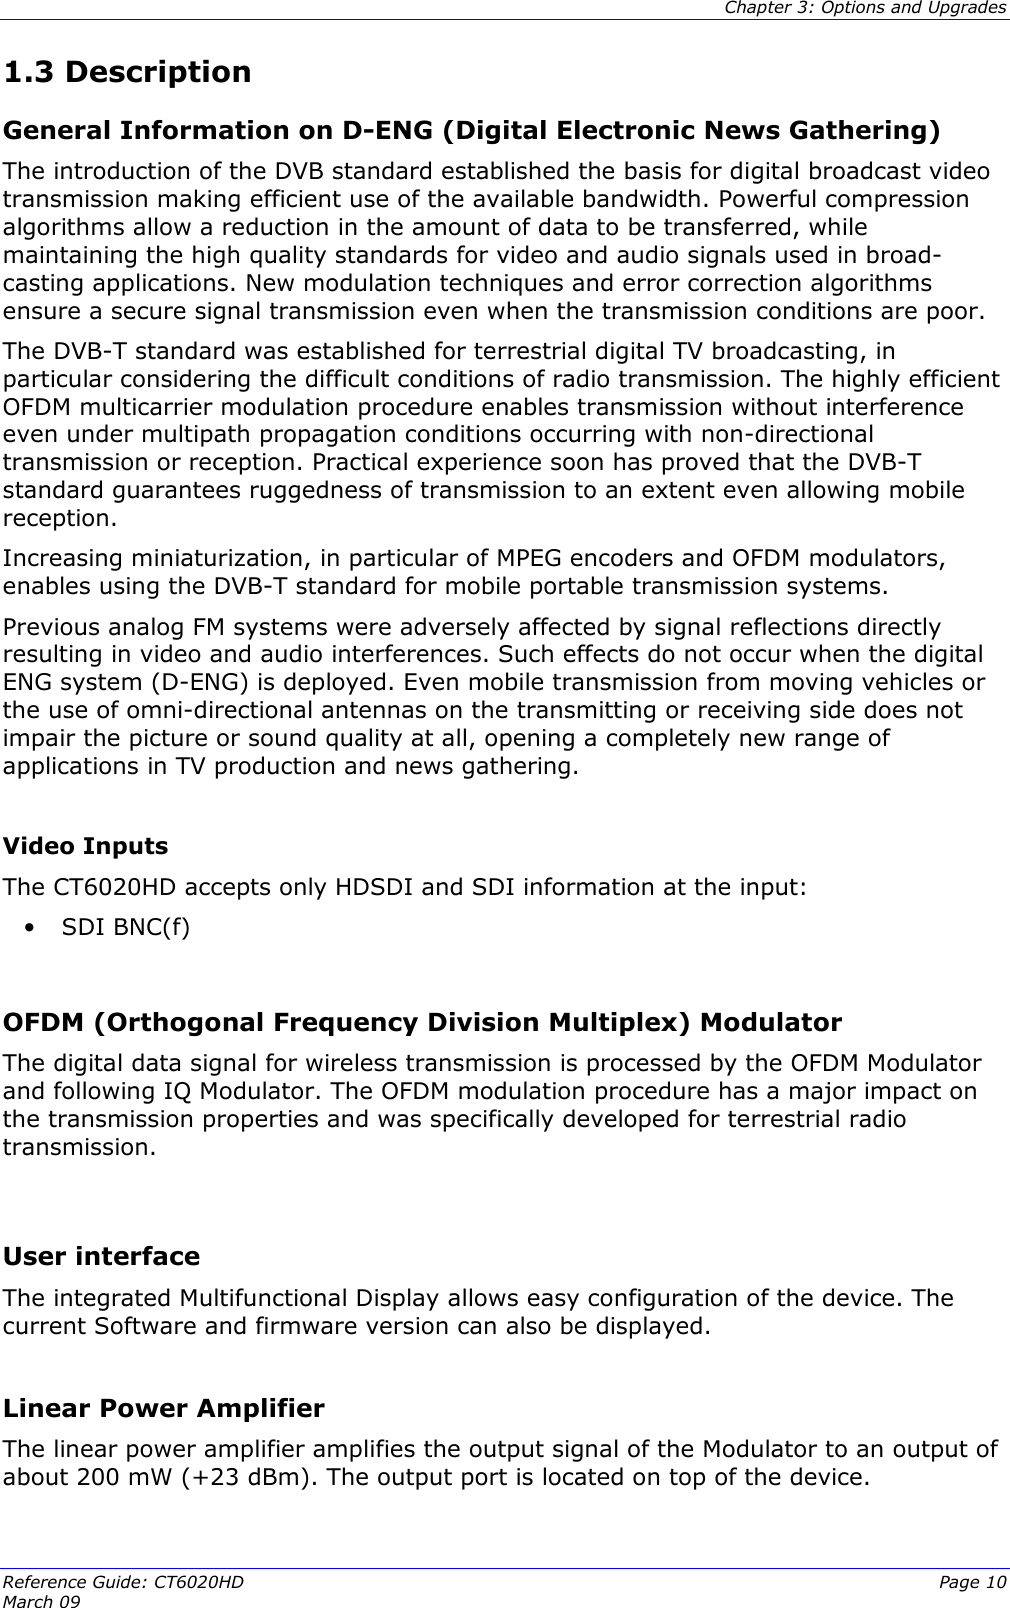  Chapter 3: Options and Upgrades Reference Guide: CT6020HD  Page 10 March 09   1.3 Description General Information on D-ENG (Digital Electronic News Gathering) The introduction of the DVB standard established the basis for digital broadcast video transmission making efficient use of the available bandwidth. Powerful compression algorithms allow a reduction in the amount of data to be transferred, while maintaining the high quality standards for video and audio signals used in broad-casting applications. New modulation techniques and error correction algorithms ensure a secure signal transmission even when the transmission conditions are poor. The DVB-T standard was established for terrestrial digital TV broadcasting, in particular considering the difficult conditions of radio transmission. The highly efficient OFDM multicarrier modulation procedure enables transmission without interference even under multipath propagation conditions occurring with non-directional transmission or reception. Practical experience soon has proved that the DVB-T standard guarantees ruggedness of transmission to an extent even allowing mobile reception. Increasing miniaturization, in particular of MPEG encoders and OFDM modulators, enables using the DVB-T standard for mobile portable transmission systems.  Previous analog FM systems were adversely affected by signal reflections directly resulting in video and audio interferences. Such effects do not occur when the digital ENG system (D-ENG) is deployed. Even mobile transmission from moving vehicles or the use of omni-directional antennas on the transmitting or receiving side does not impair the picture or sound quality at all, opening a completely new range of applications in TV production and news gathering.  Video Inputs The CT6020HD accepts only HDSDI and SDI information at the input: • SDI BNC(f)  OFDM (Orthogonal Frequency Division Multiplex) Modulator The digital data signal for wireless transmission is processed by the OFDM Modulator and following IQ Modulator. The OFDM modulation procedure has a major impact on the transmission properties and was specifically developed for terrestrial radio transmission.  User interface The integrated Multifunctional Display allows easy configuration of the device. The current Software and firmware version can also be displayed.  Linear Power Amplifier The linear power amplifier amplifies the output signal of the Modulator to an output of about 200 mW (+23 dBm). The output port is located on top of the device.  